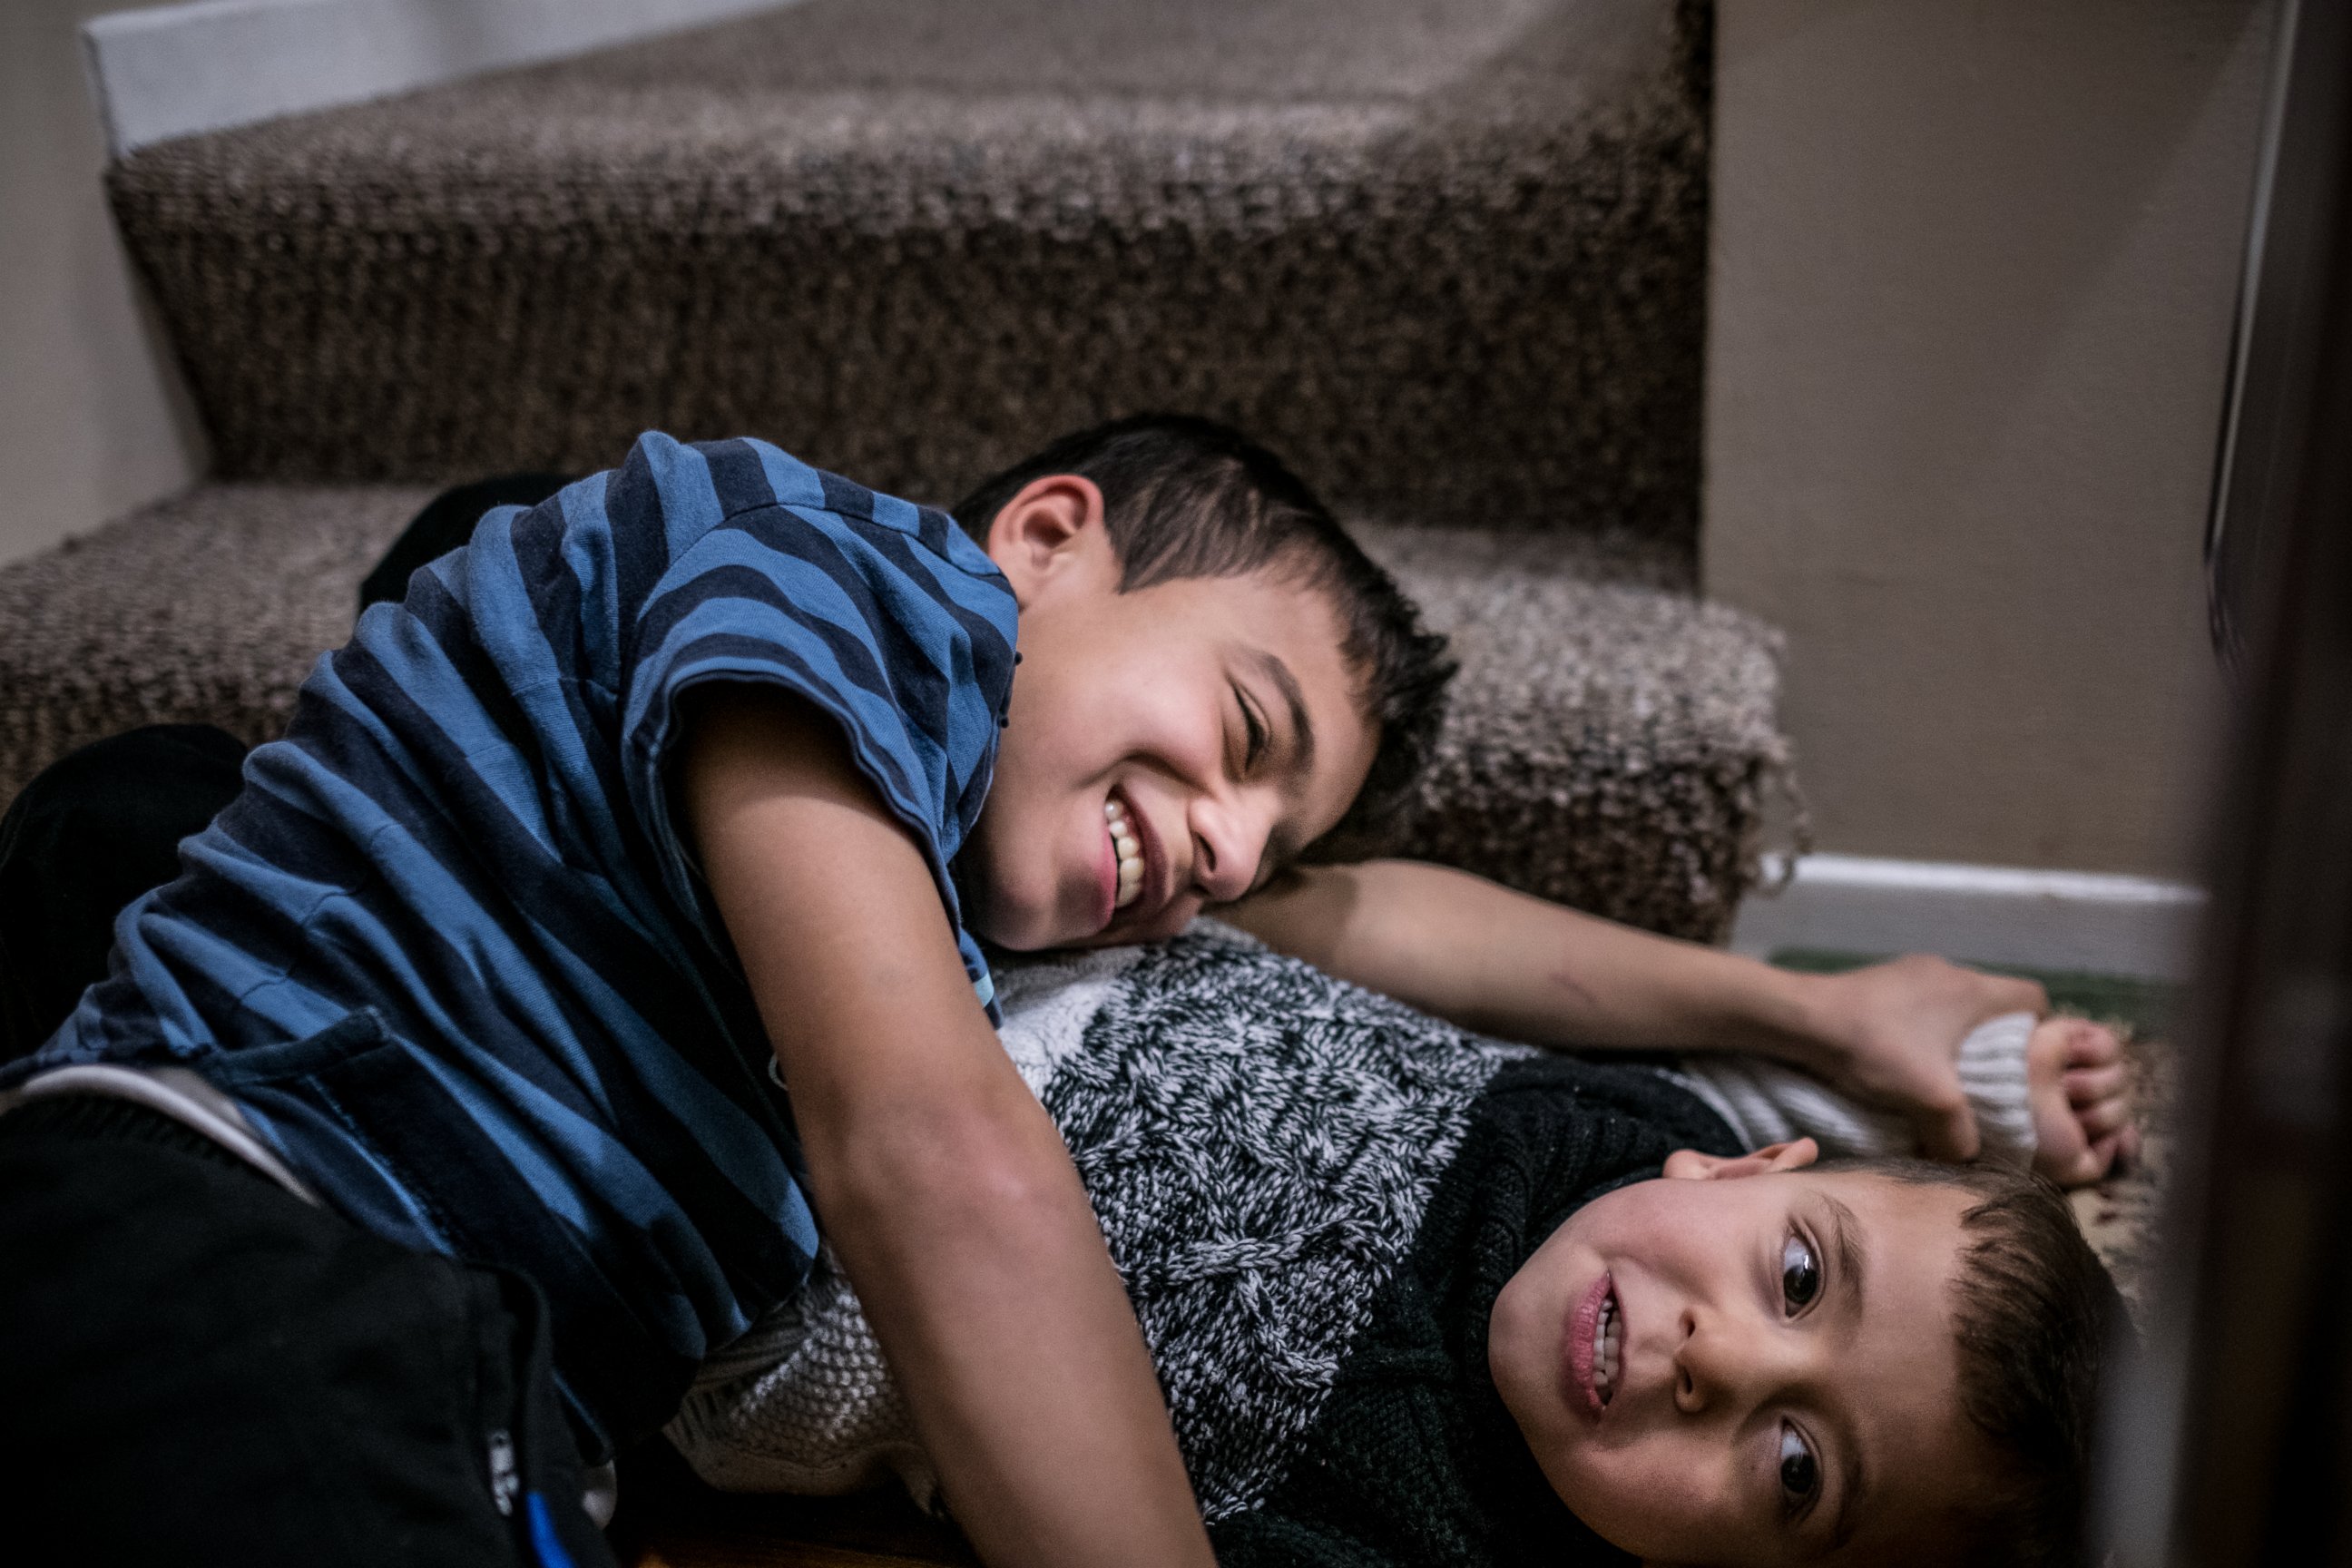 PHOTO: Basel Alrashdan, 11, and his brother Idress, 5, play at home in Charlottetown, on Prince Edward Island, Canada, on December 14, 2016. The Alrashdan family, arrived on Dec 27, 2015, are some of the 250 Syrian refugees that have been settled here.